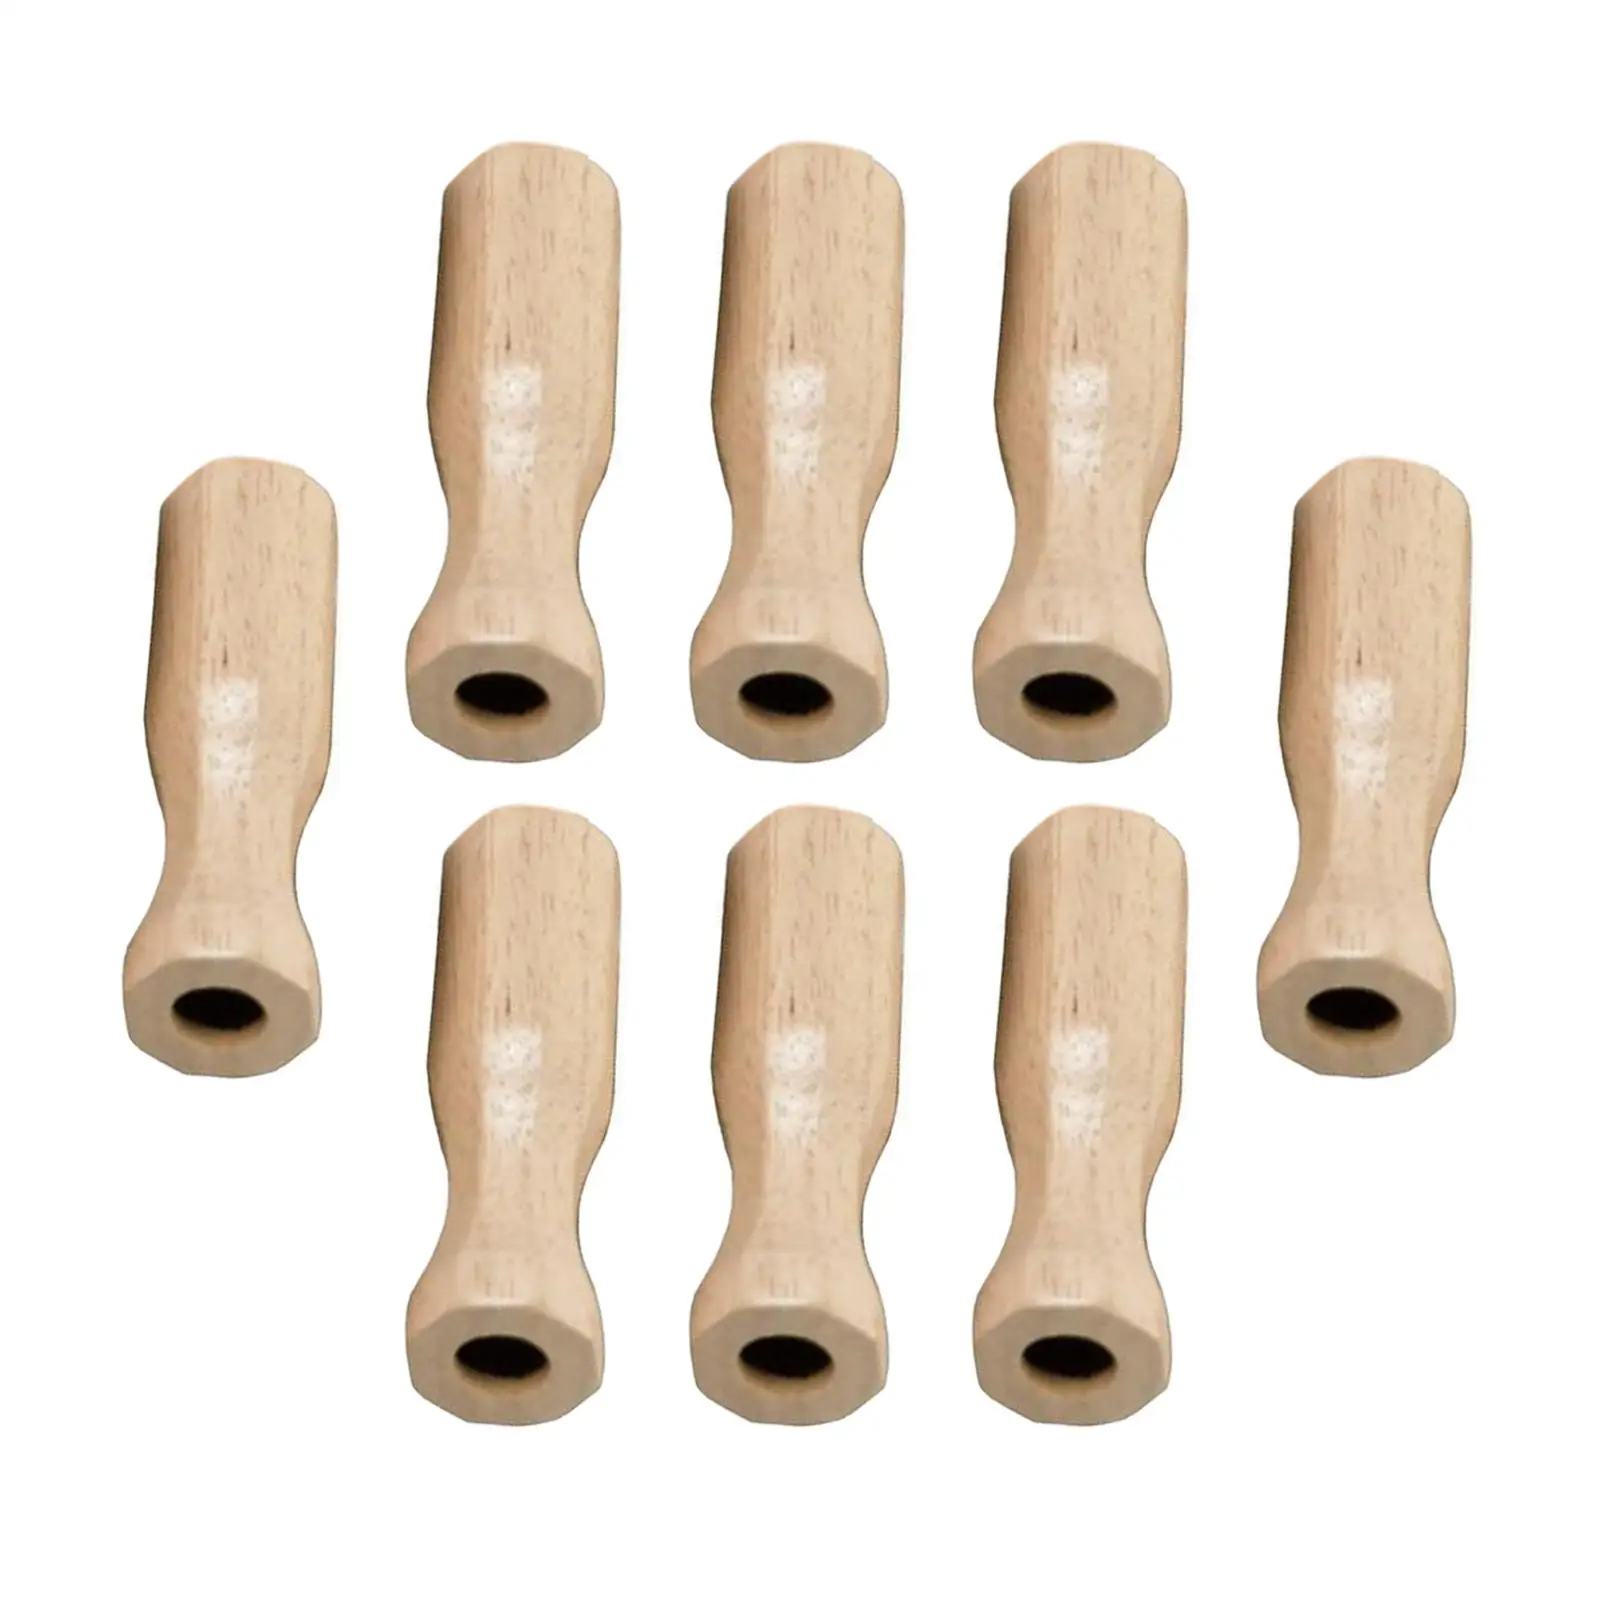 8x Soccer Table Handles Durable Wooden Foosball Handle Rod for Soccer Machine Indoor Table Soccer Standard Foosball Tables